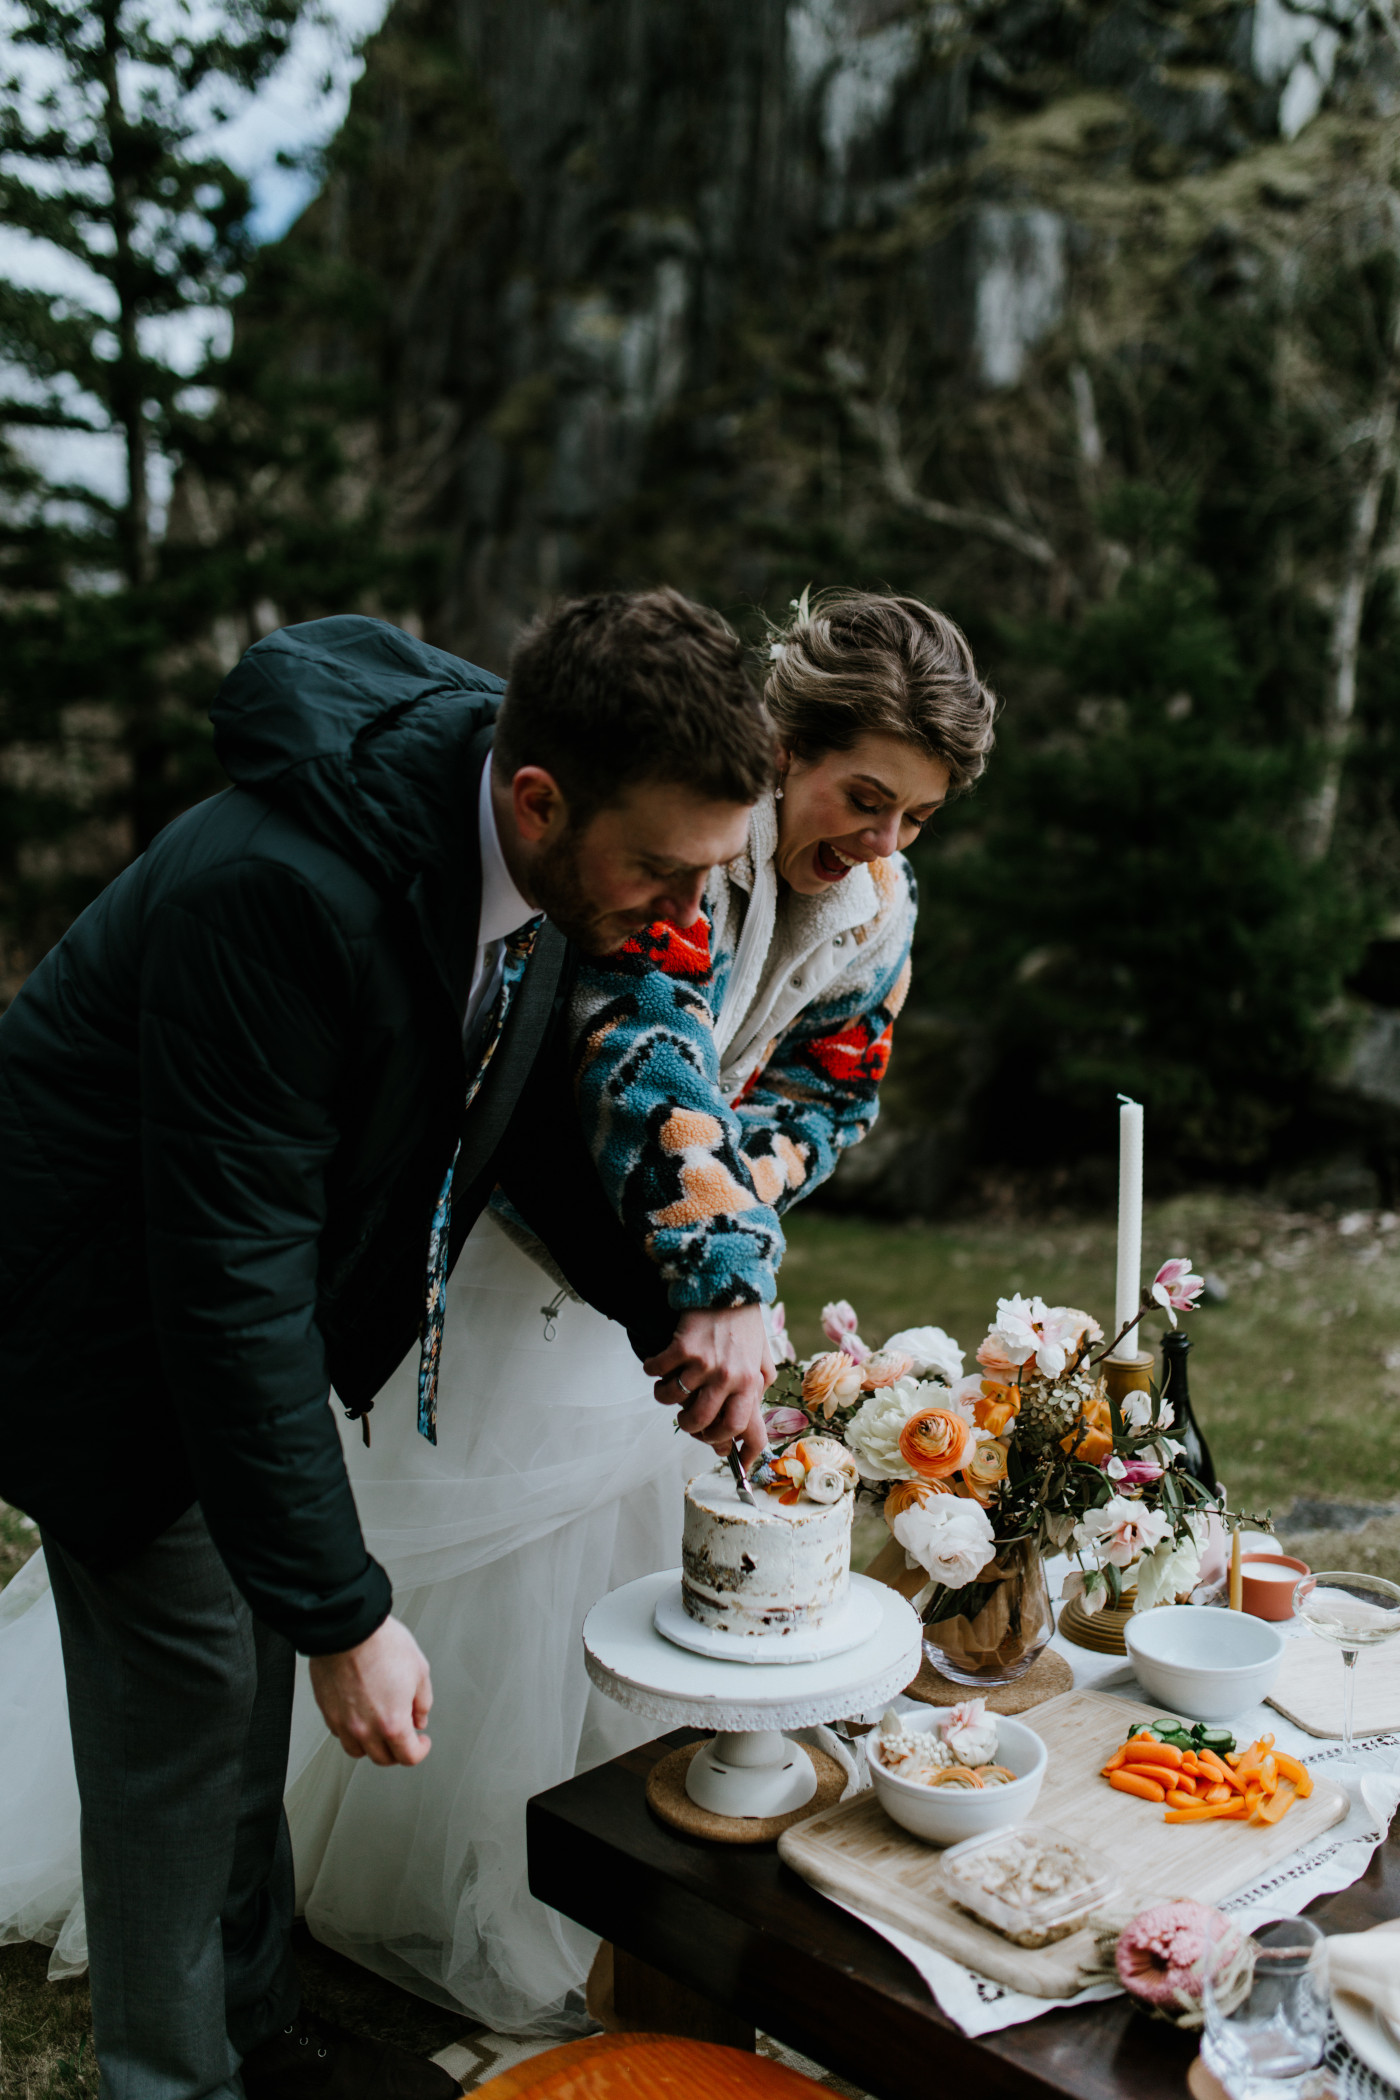 Allison and Lennie cut their cake. Elopement photography at Columbia River Gorge by Sienna Plus Josh.